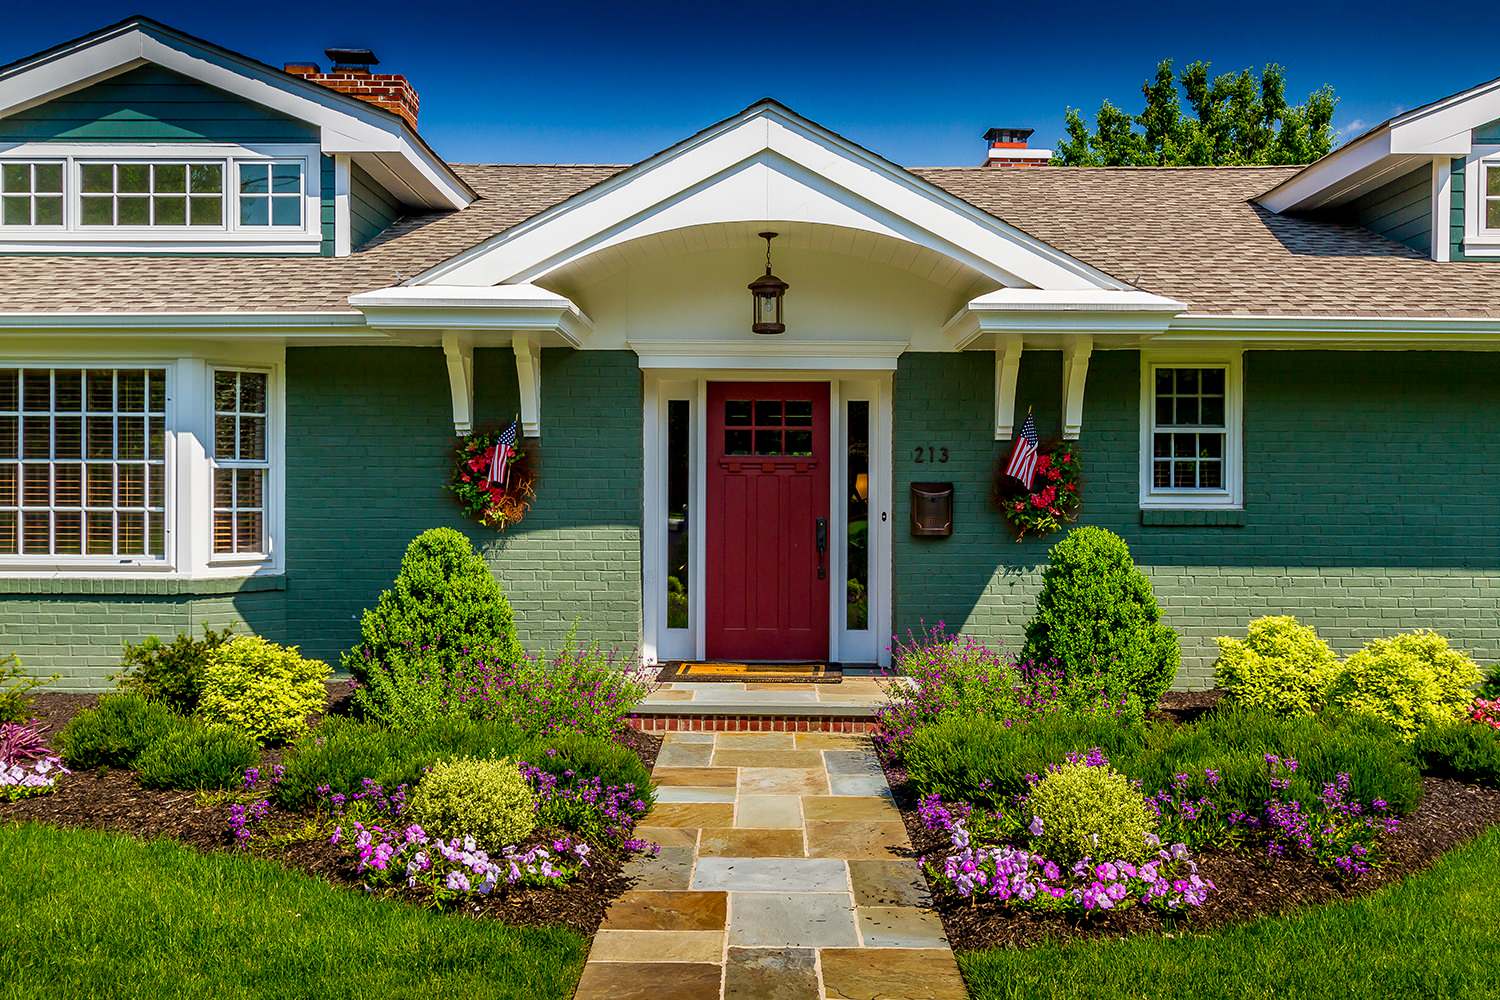 75 Green Exterior Home Ideas You'Ll Love - May, 2023 | Houzz